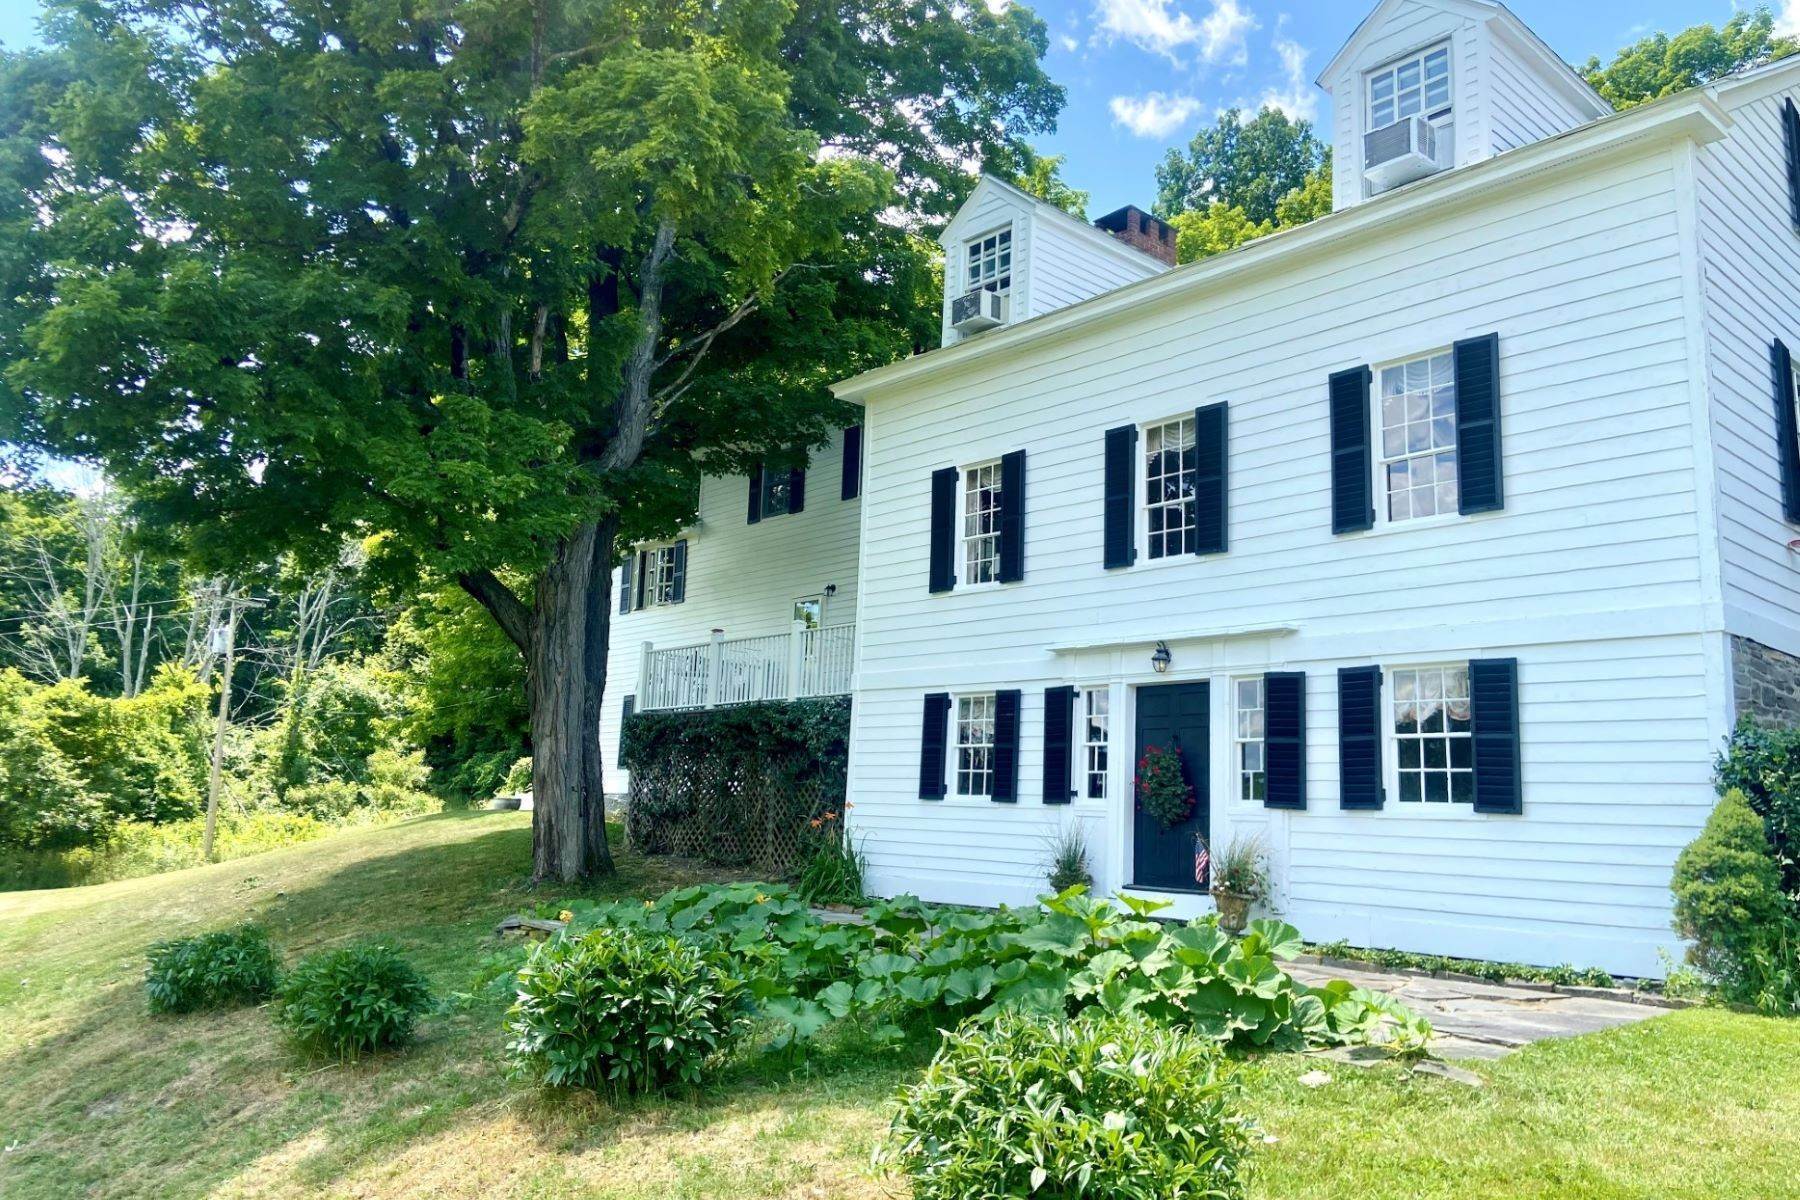 Single Family Homes for Sale at MAGNIFICENT HUDSON VALLEY FARMHOUSE 160 ACRES POOL POND BARNS 70 Smalley Rd Berne, New York 12023 United States